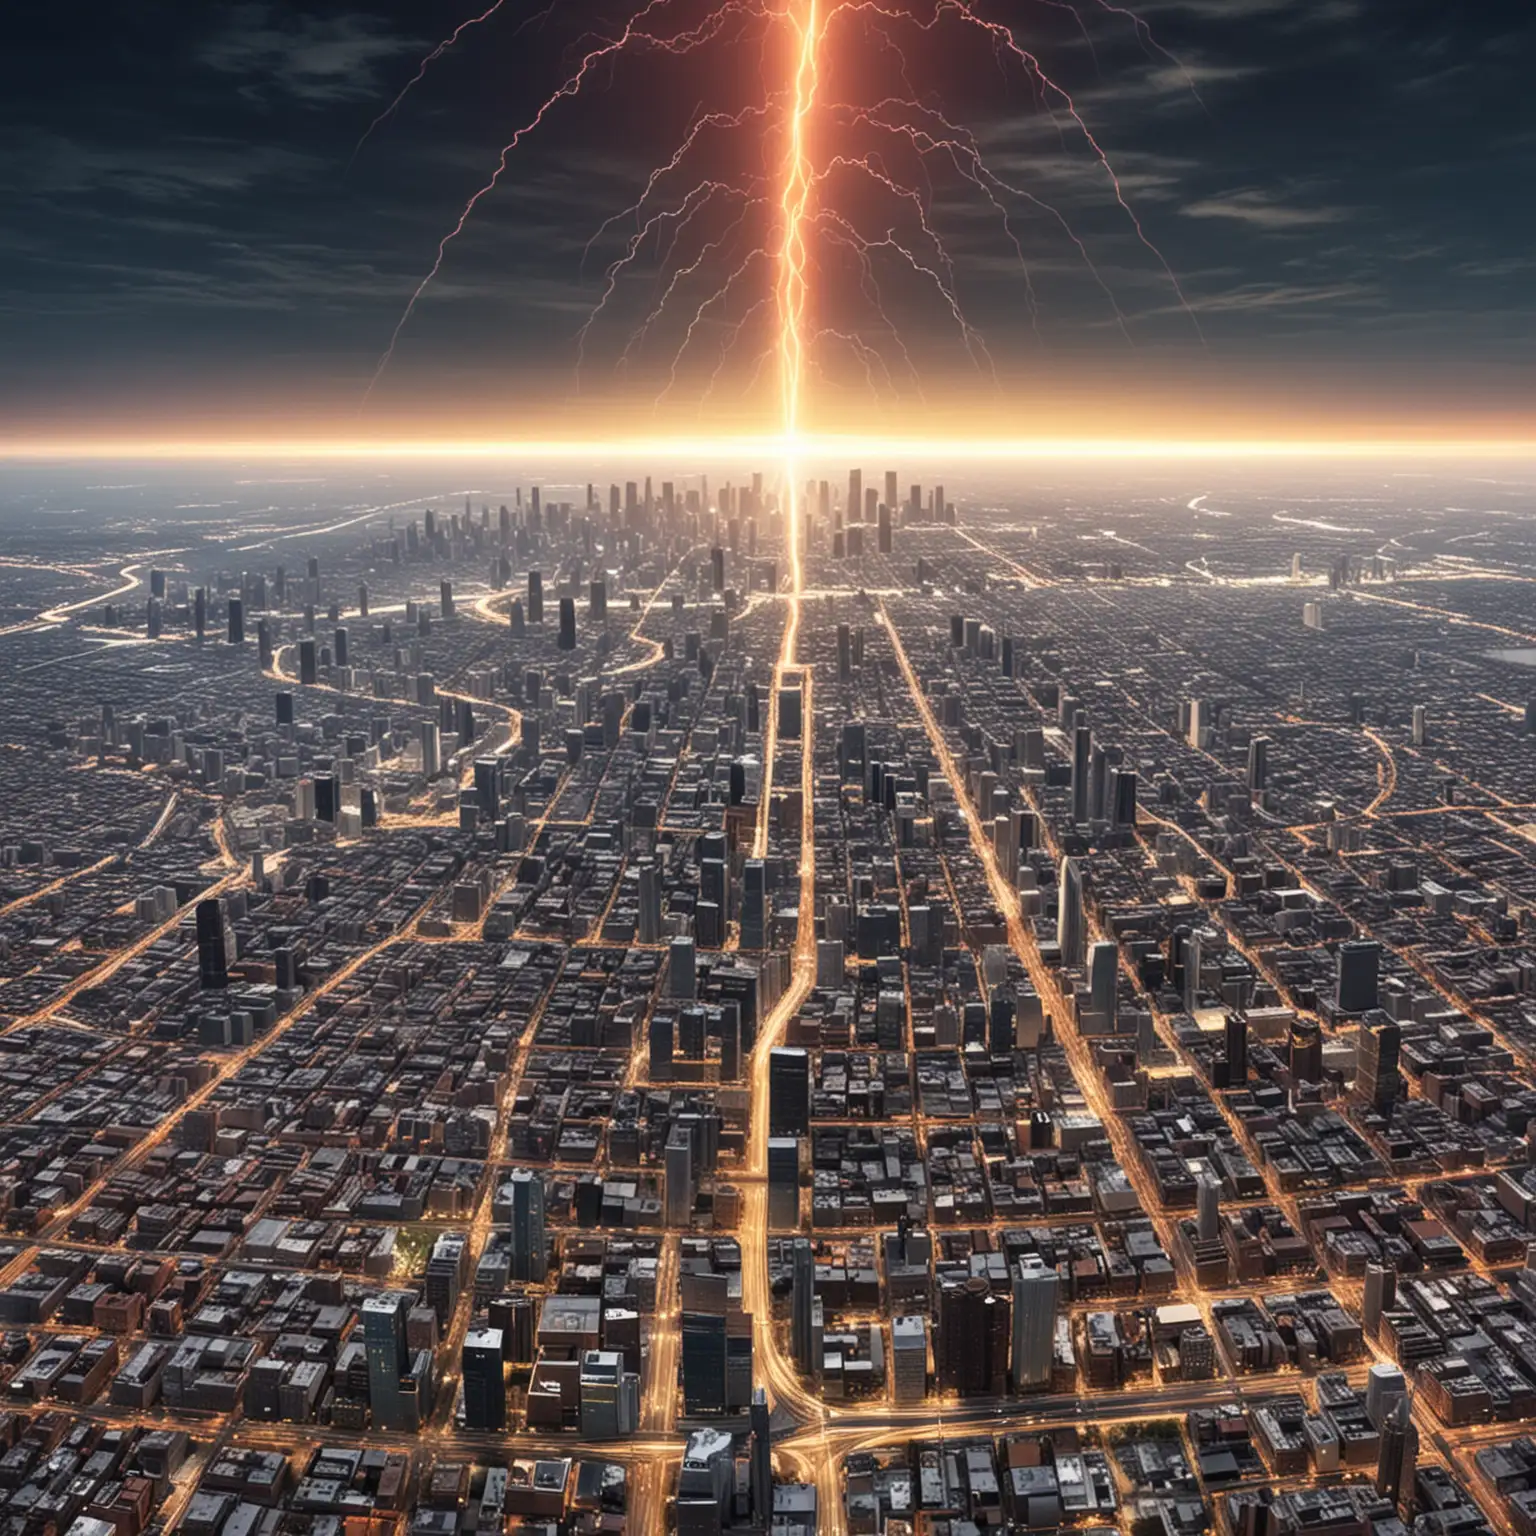 An image of how an electromagnetic pulse would affect a city.